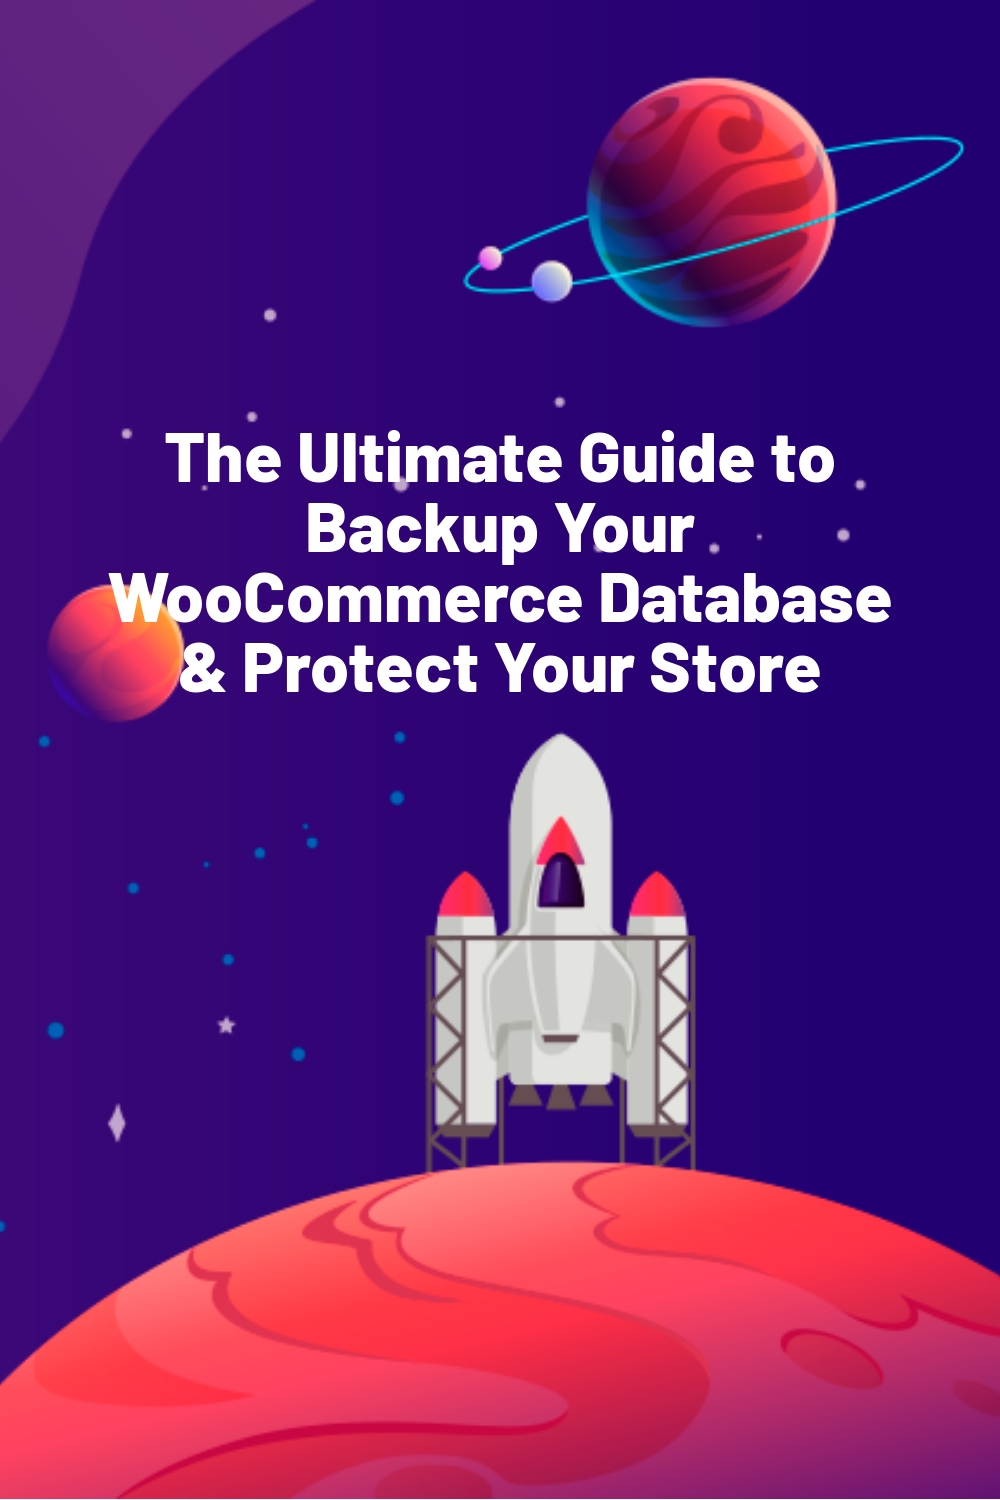 The Ultimate Guide to Backup Your WooCommerce Database & Protect Your Store